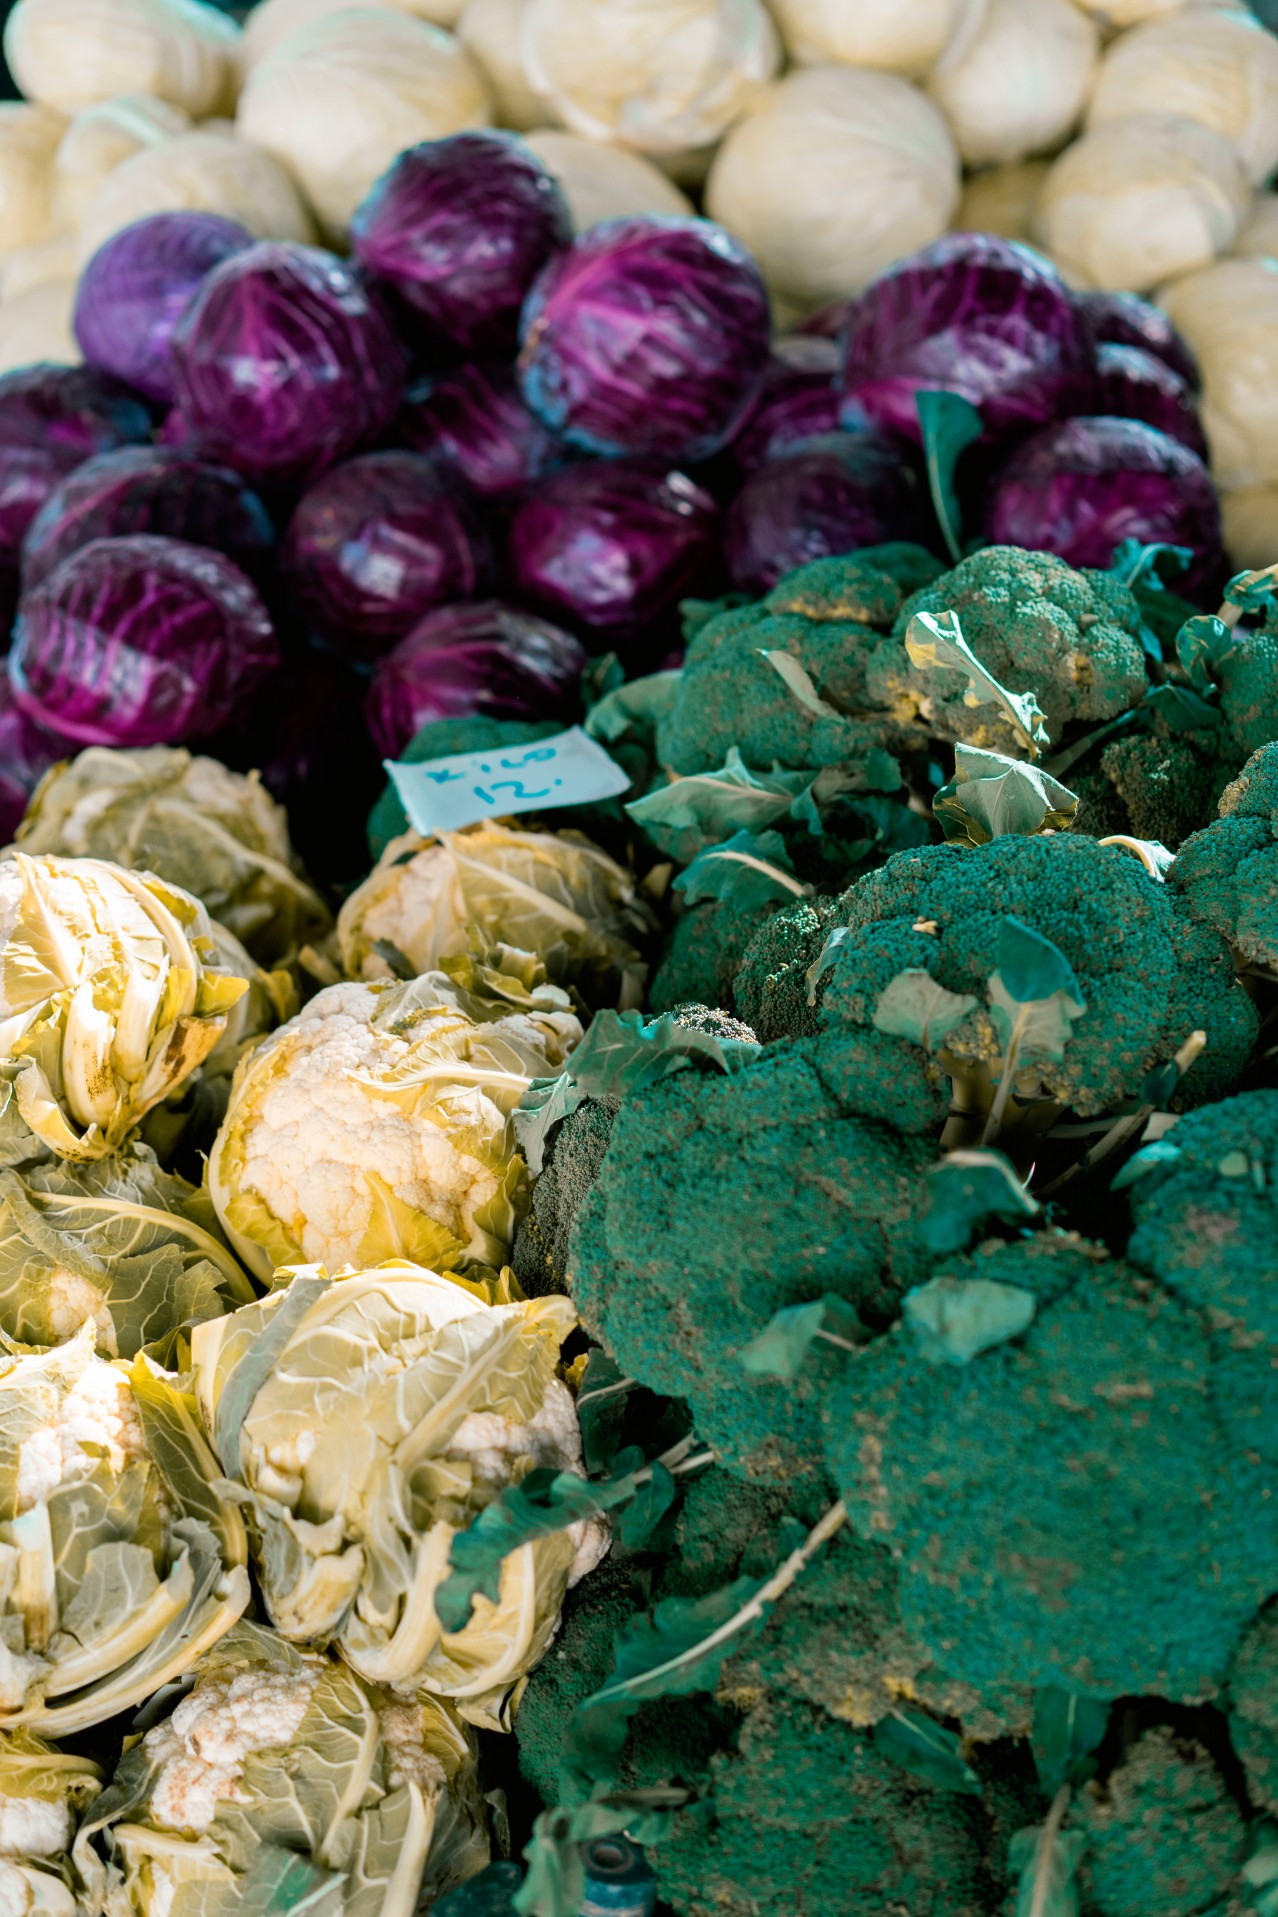 Vegetable texture with different varieties of cabbage